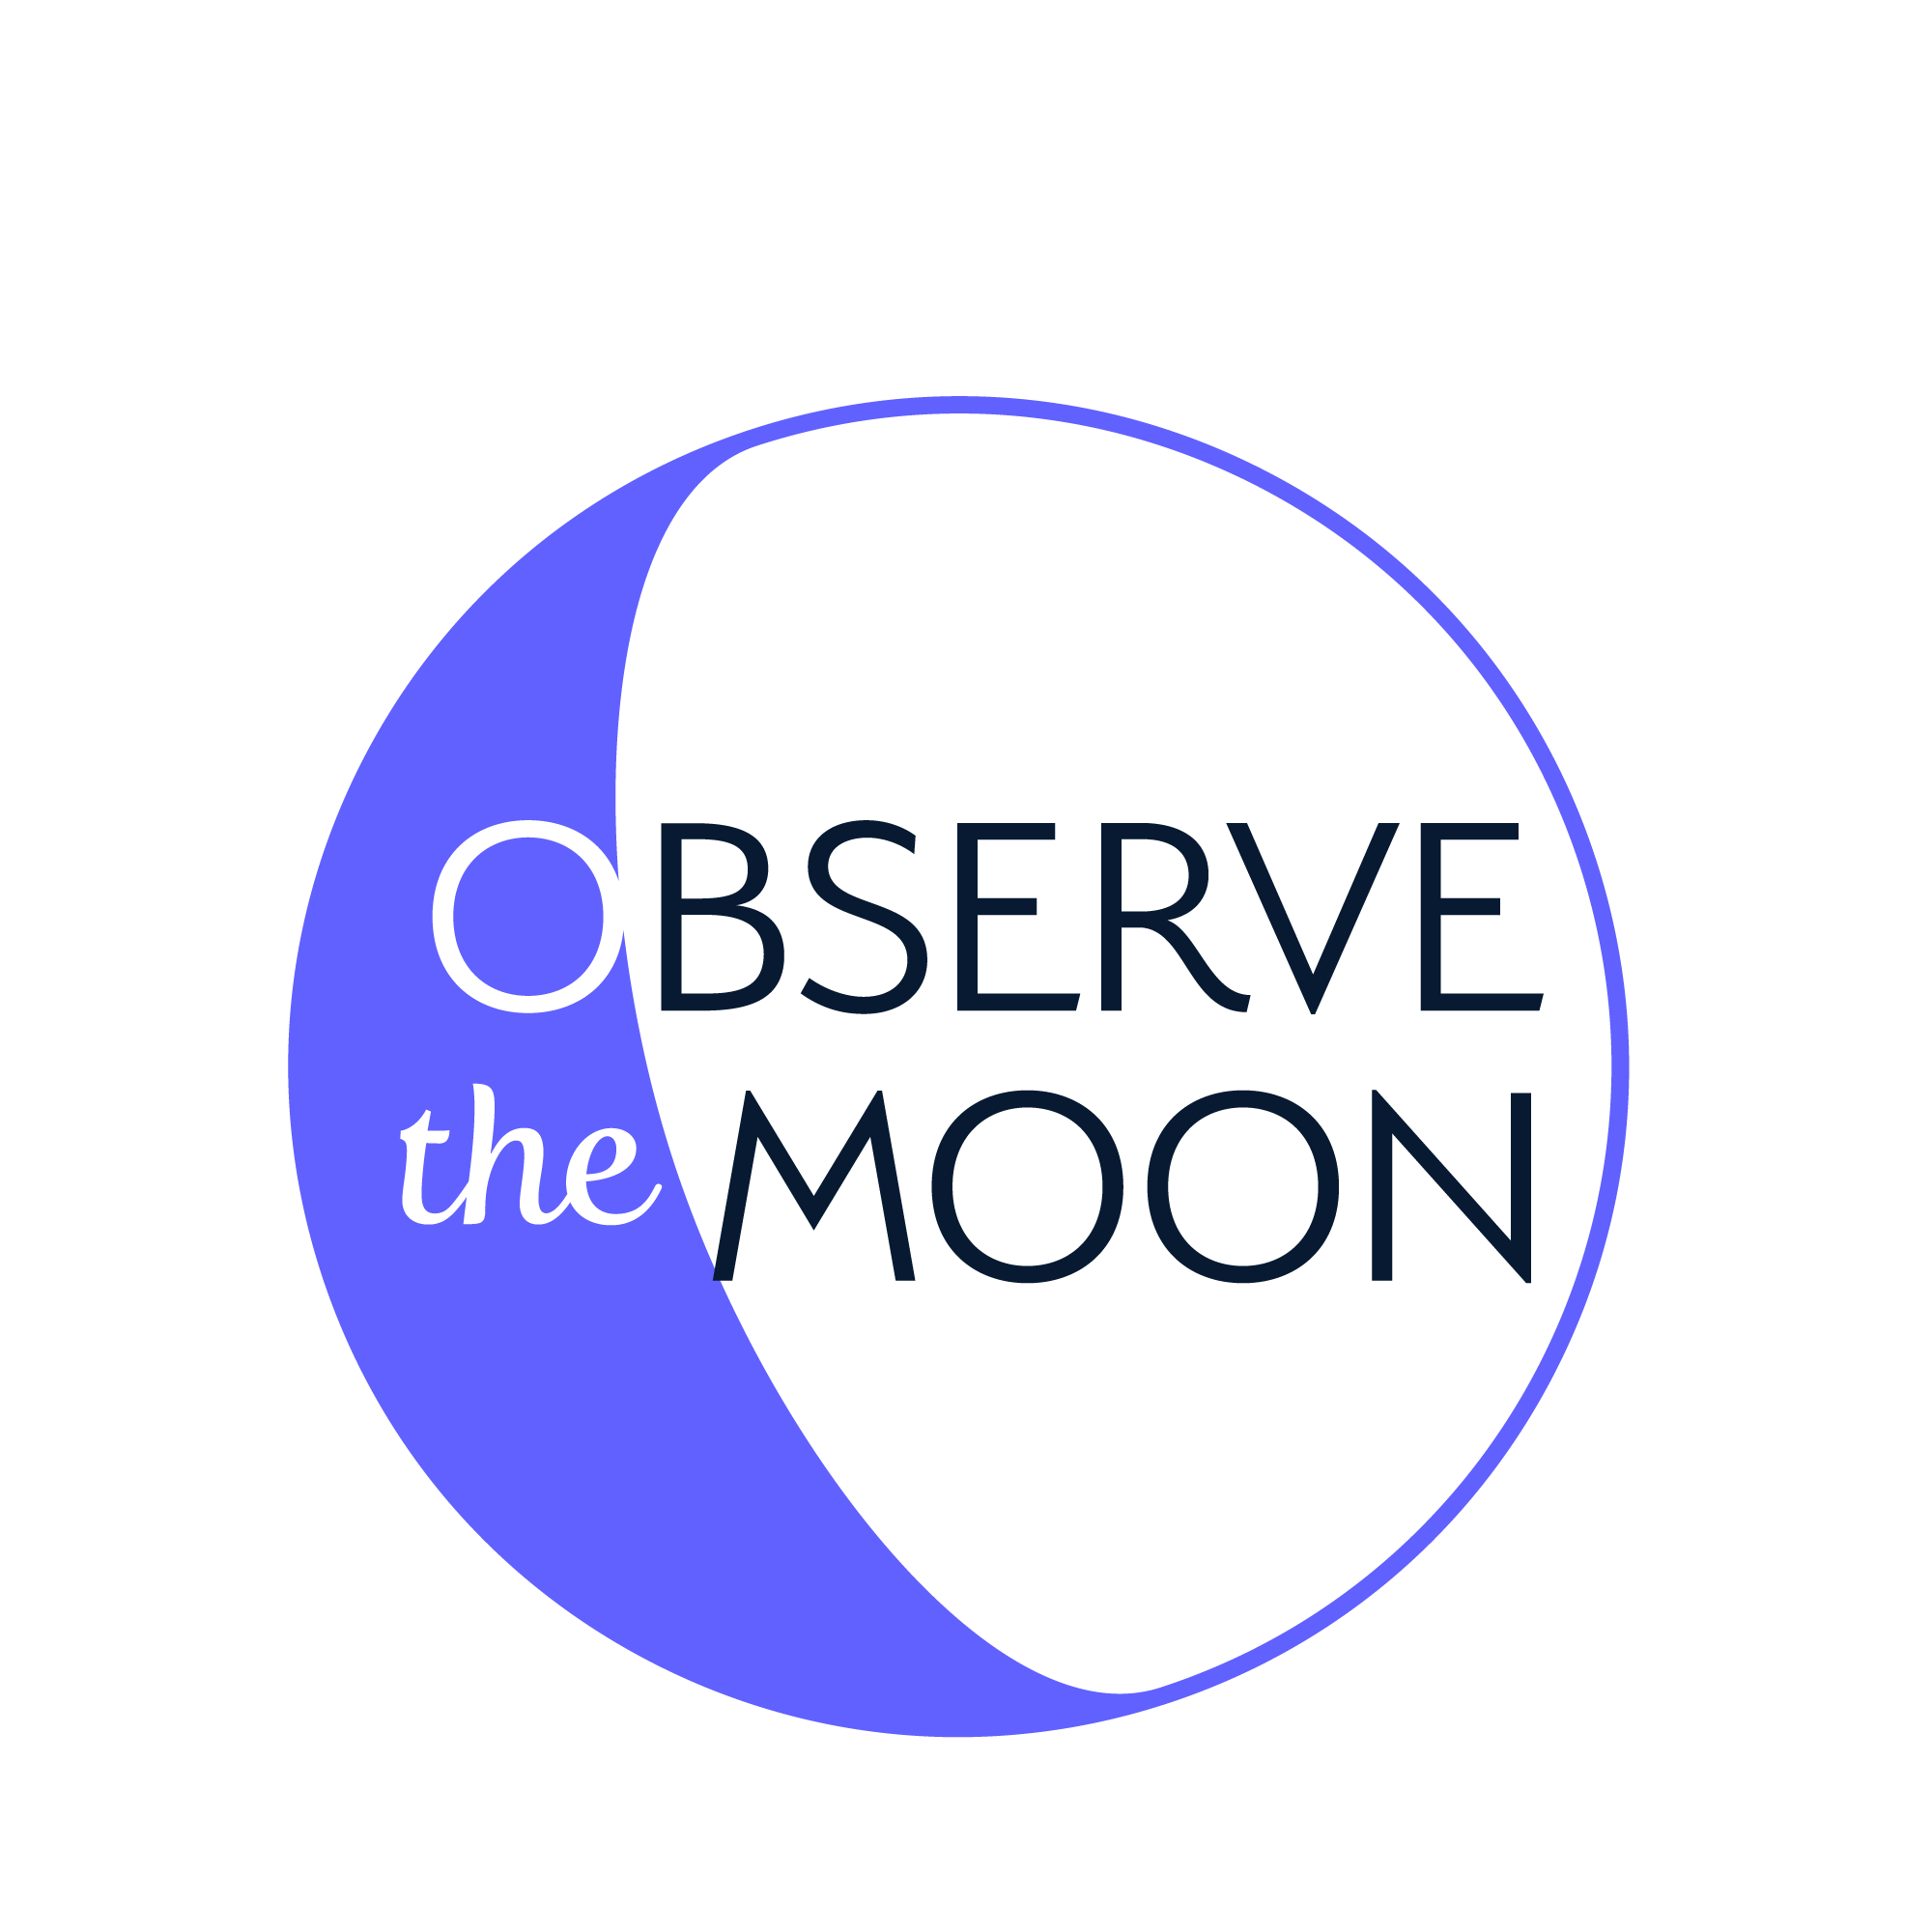 A simple two-color illustration of a gibbous Moon containing the words "Observe the Moon."